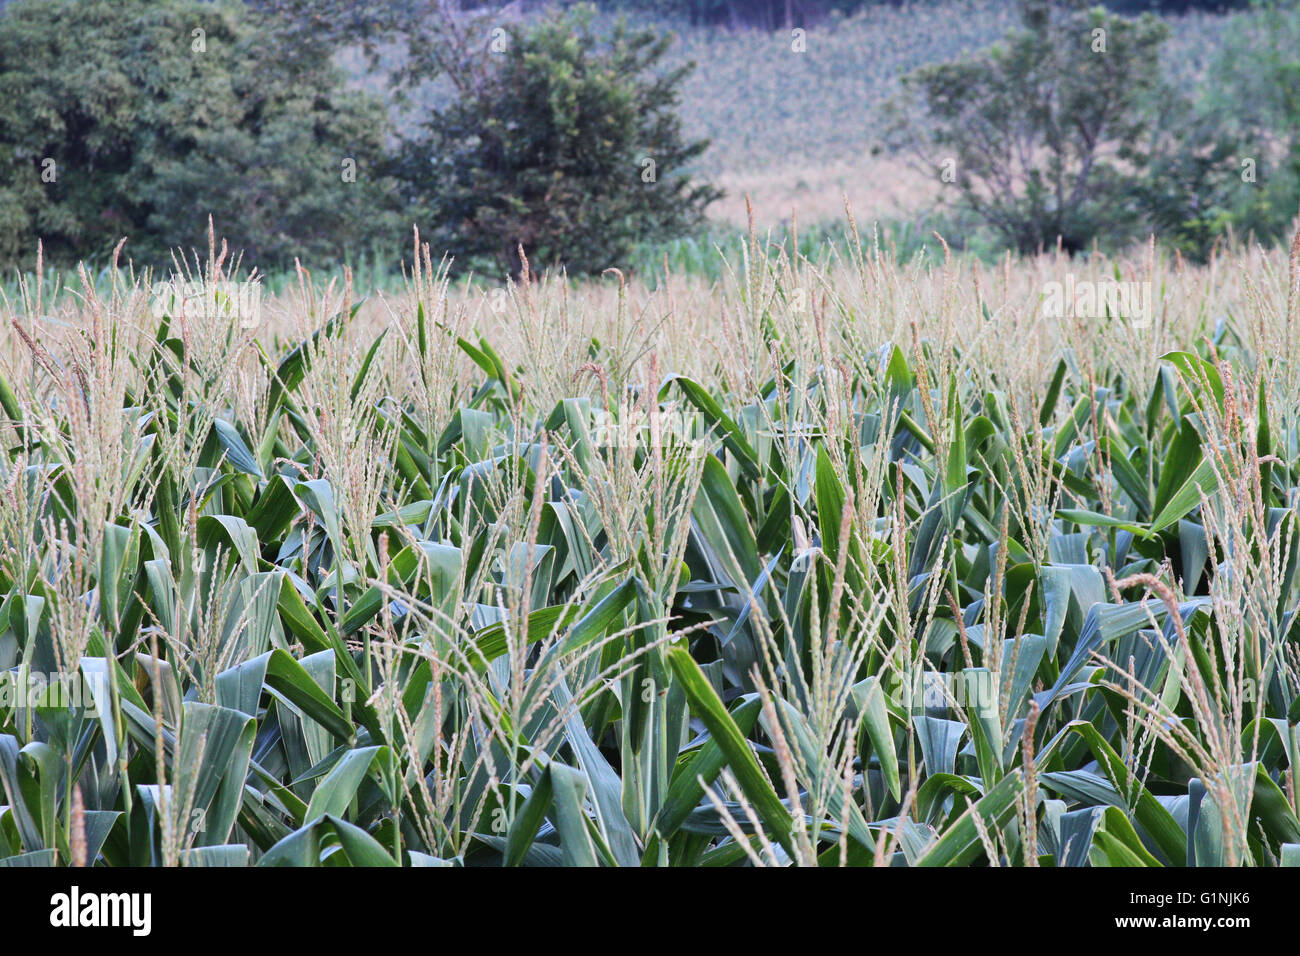 Close up of cornfield with tassels on the corn plants and trees in the background in Peru Stock Photo